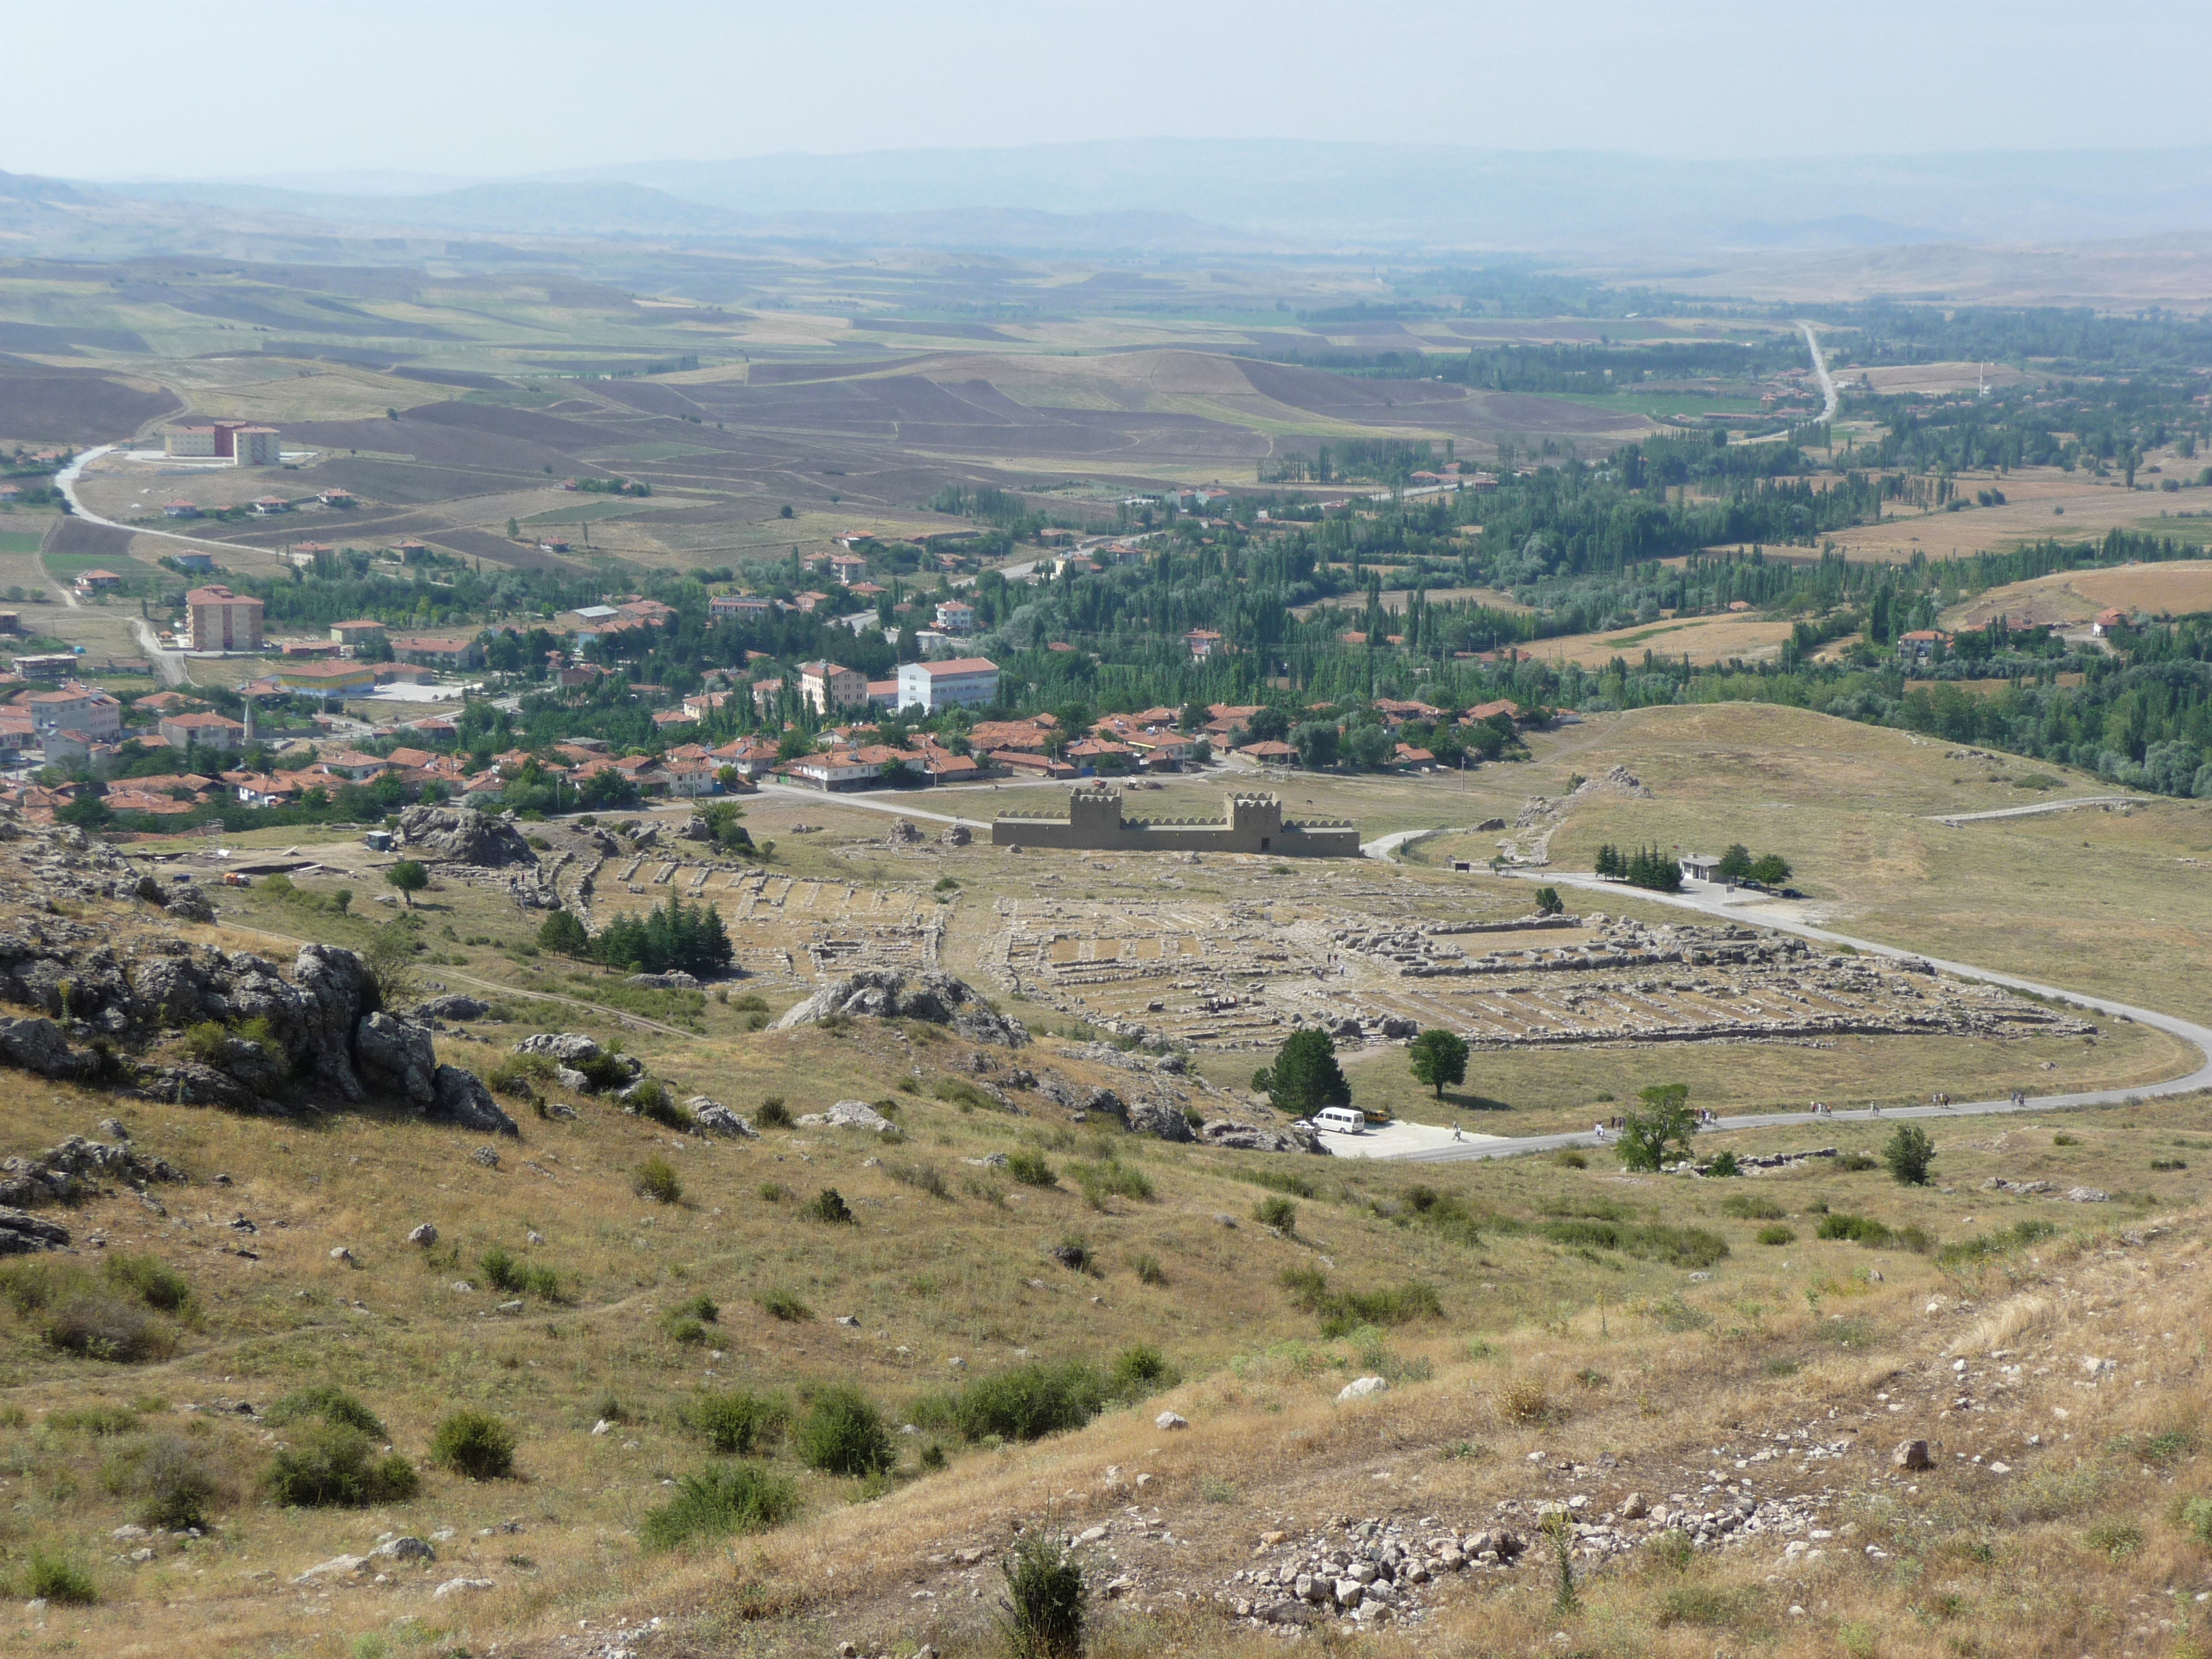 Tree study shows how drought may have doomed the ancient Hittite empire